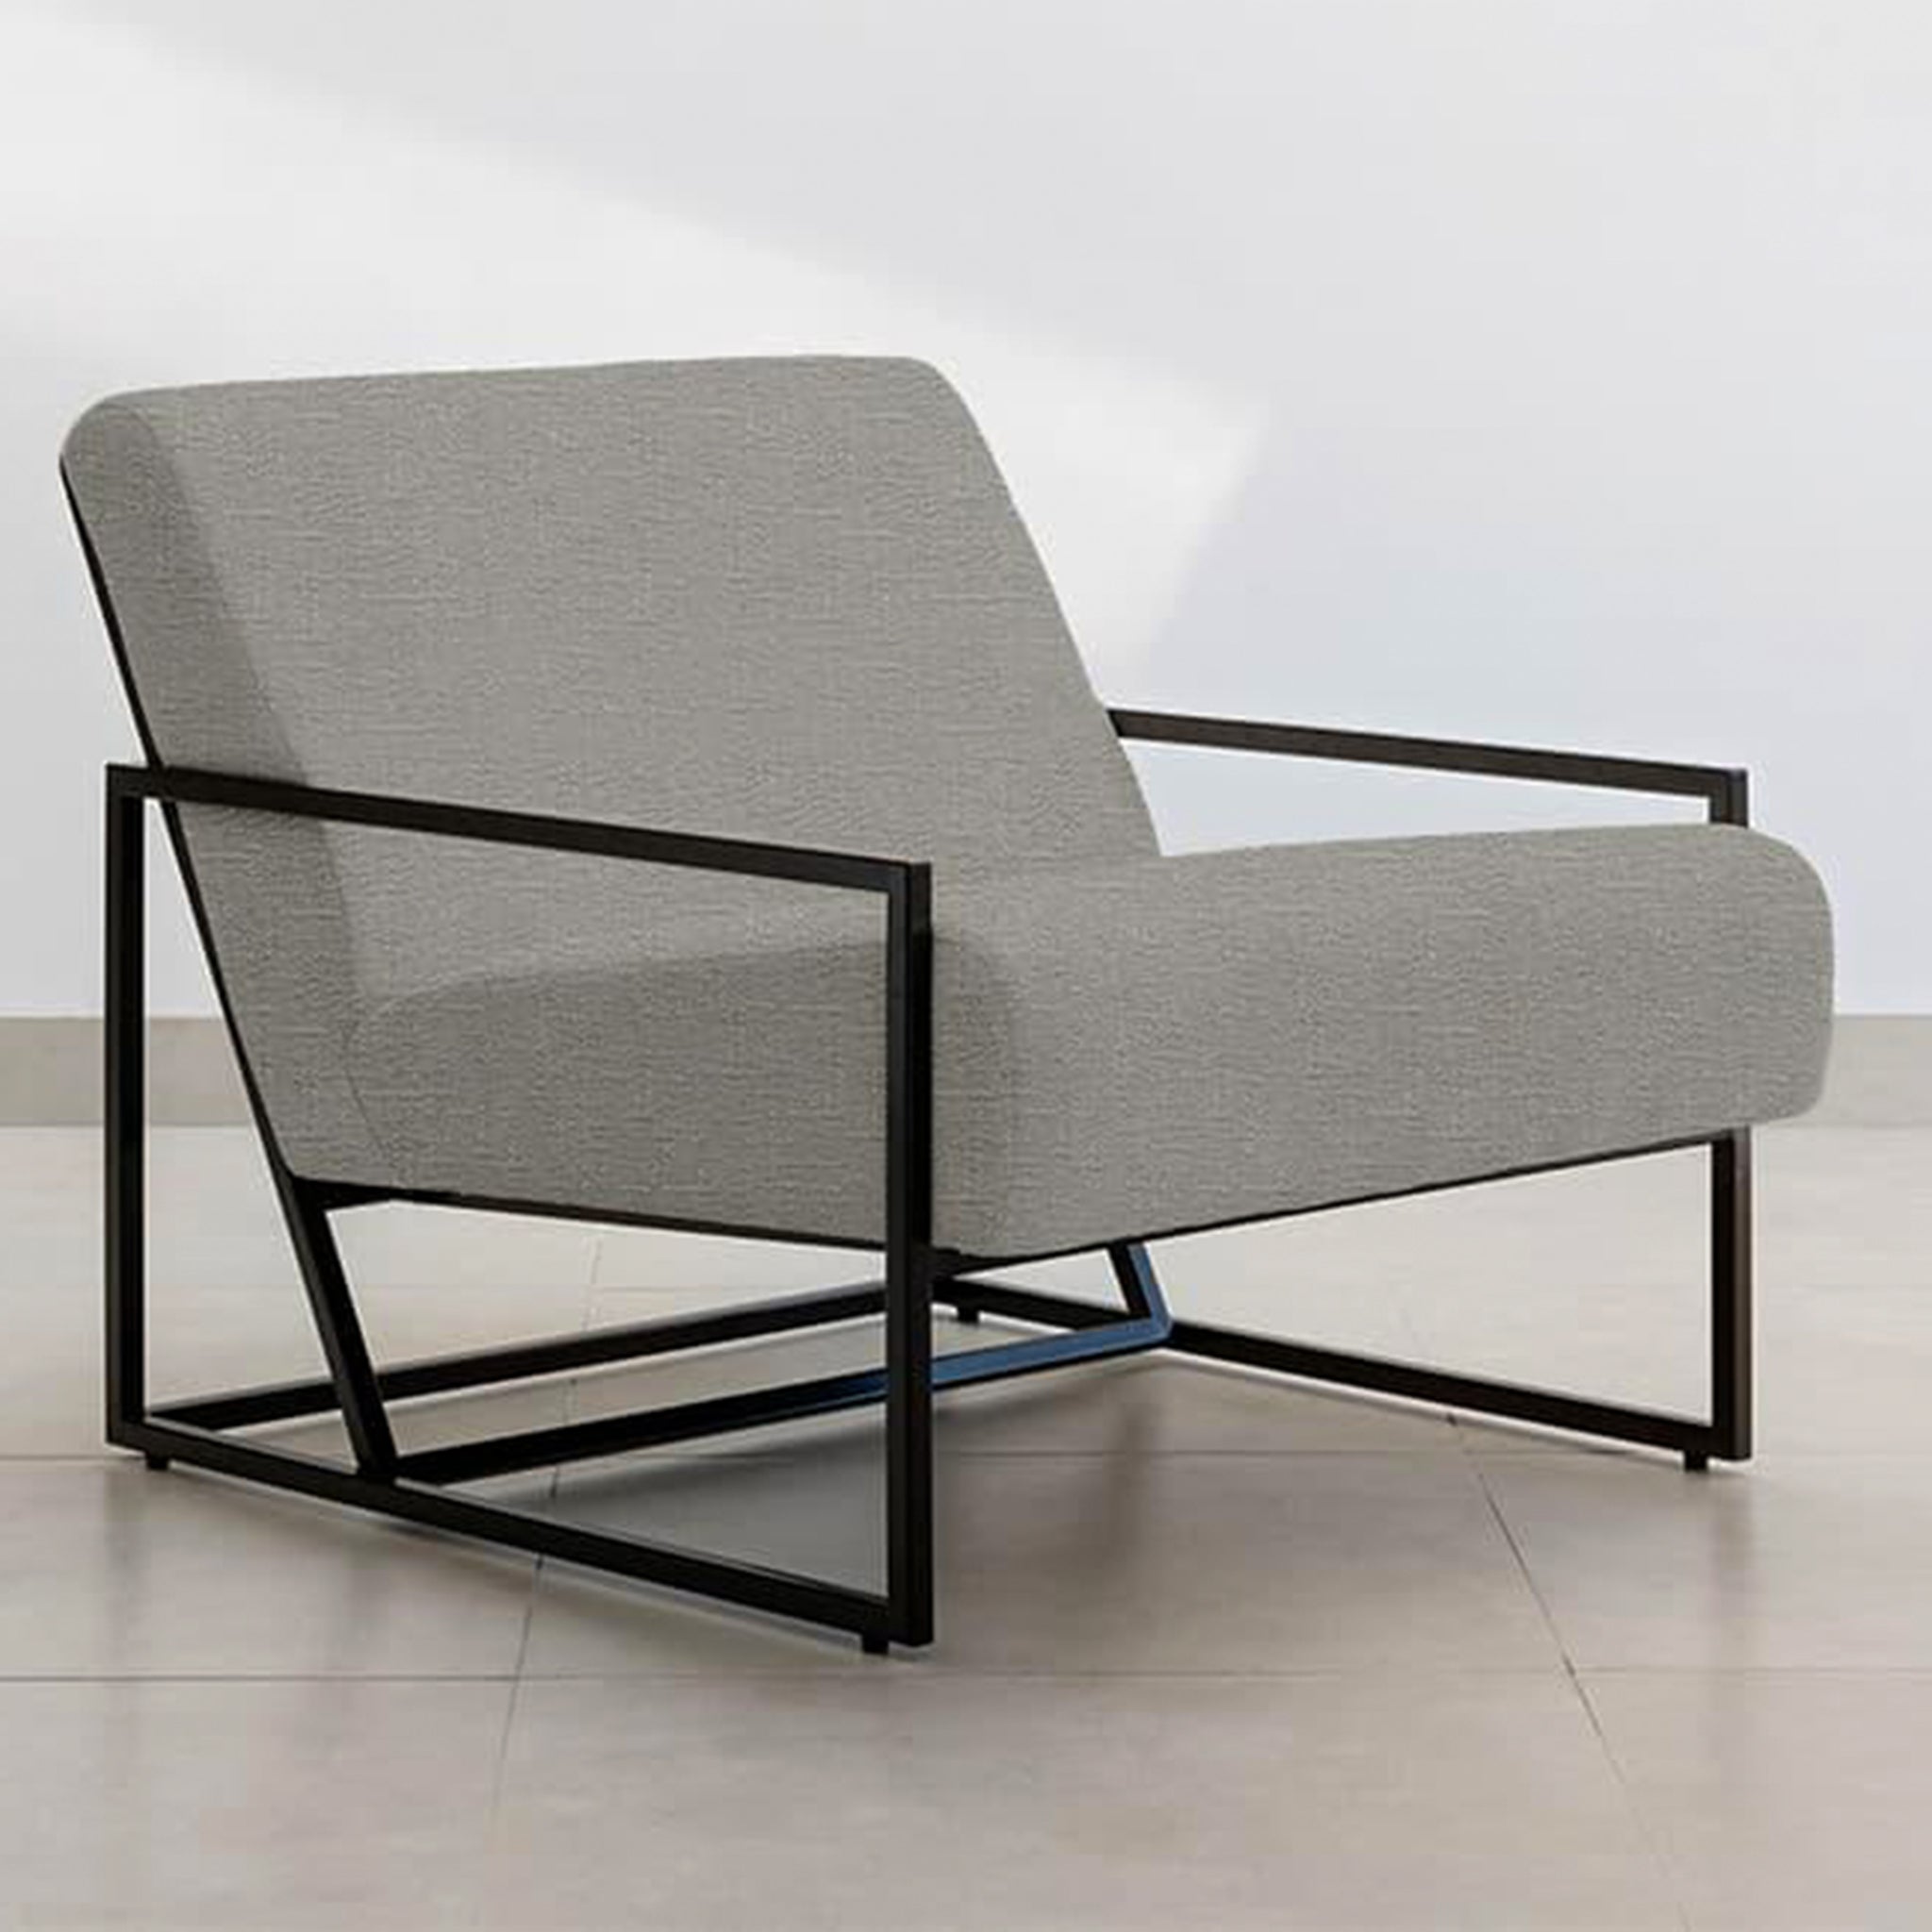 Side profile of The Daphne Accent Chair, emphasizing its geometric metal frame and deep seating.